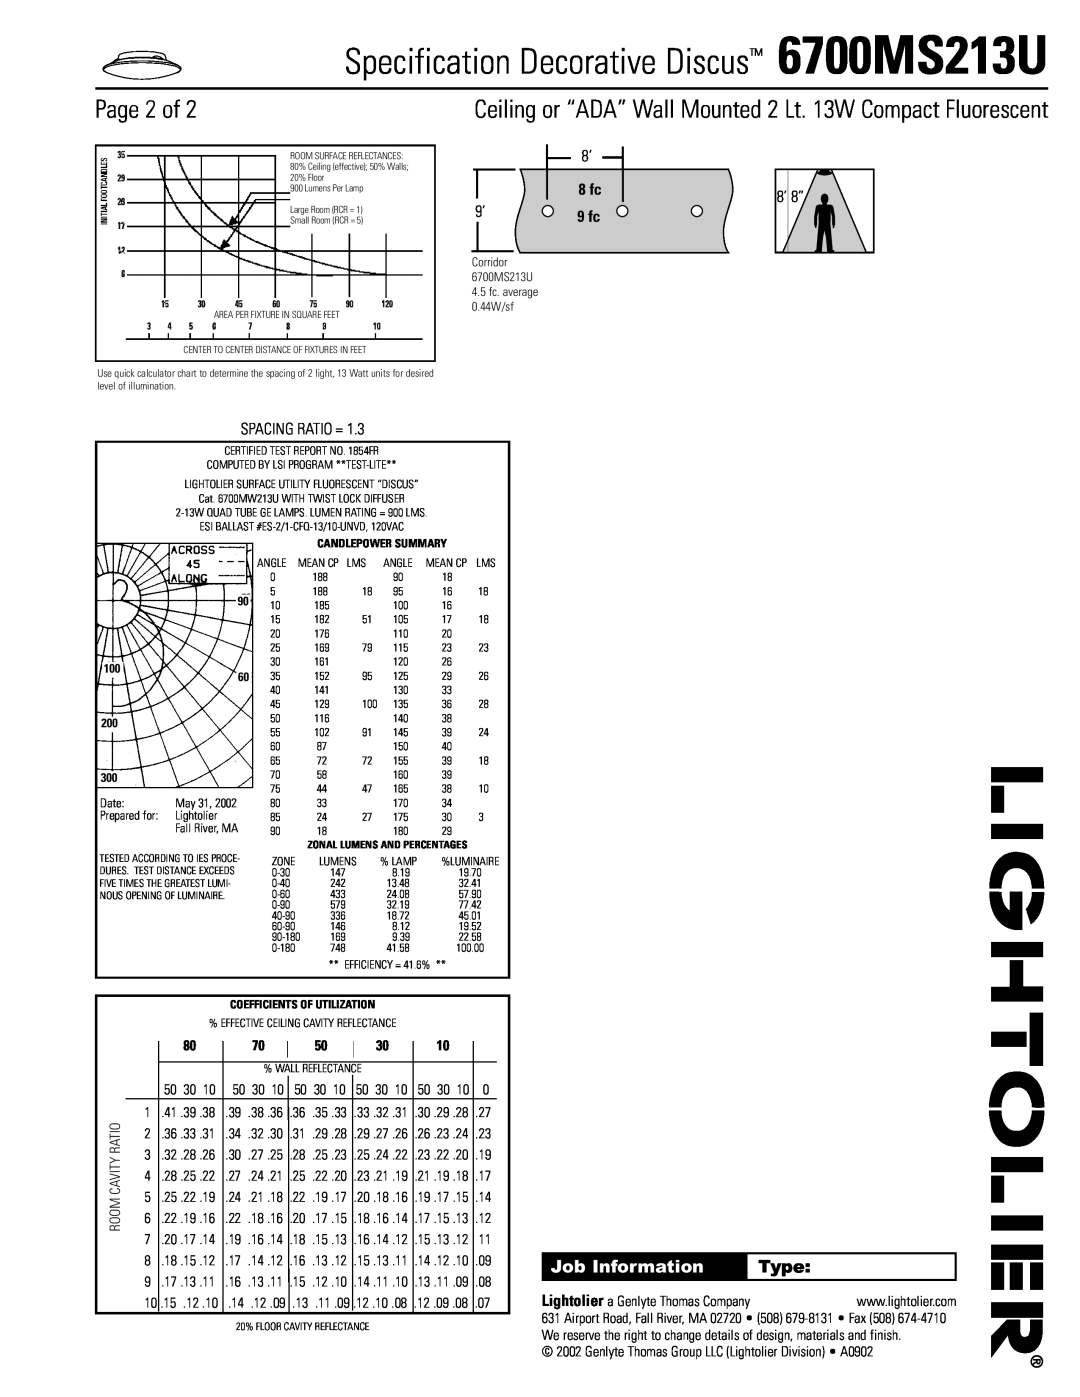 Lightolier Page 2 of, Specification Decorative Discus 6700MS213U, Job Information, Type, 8 fc 9 fc, Spacing Ratio = 